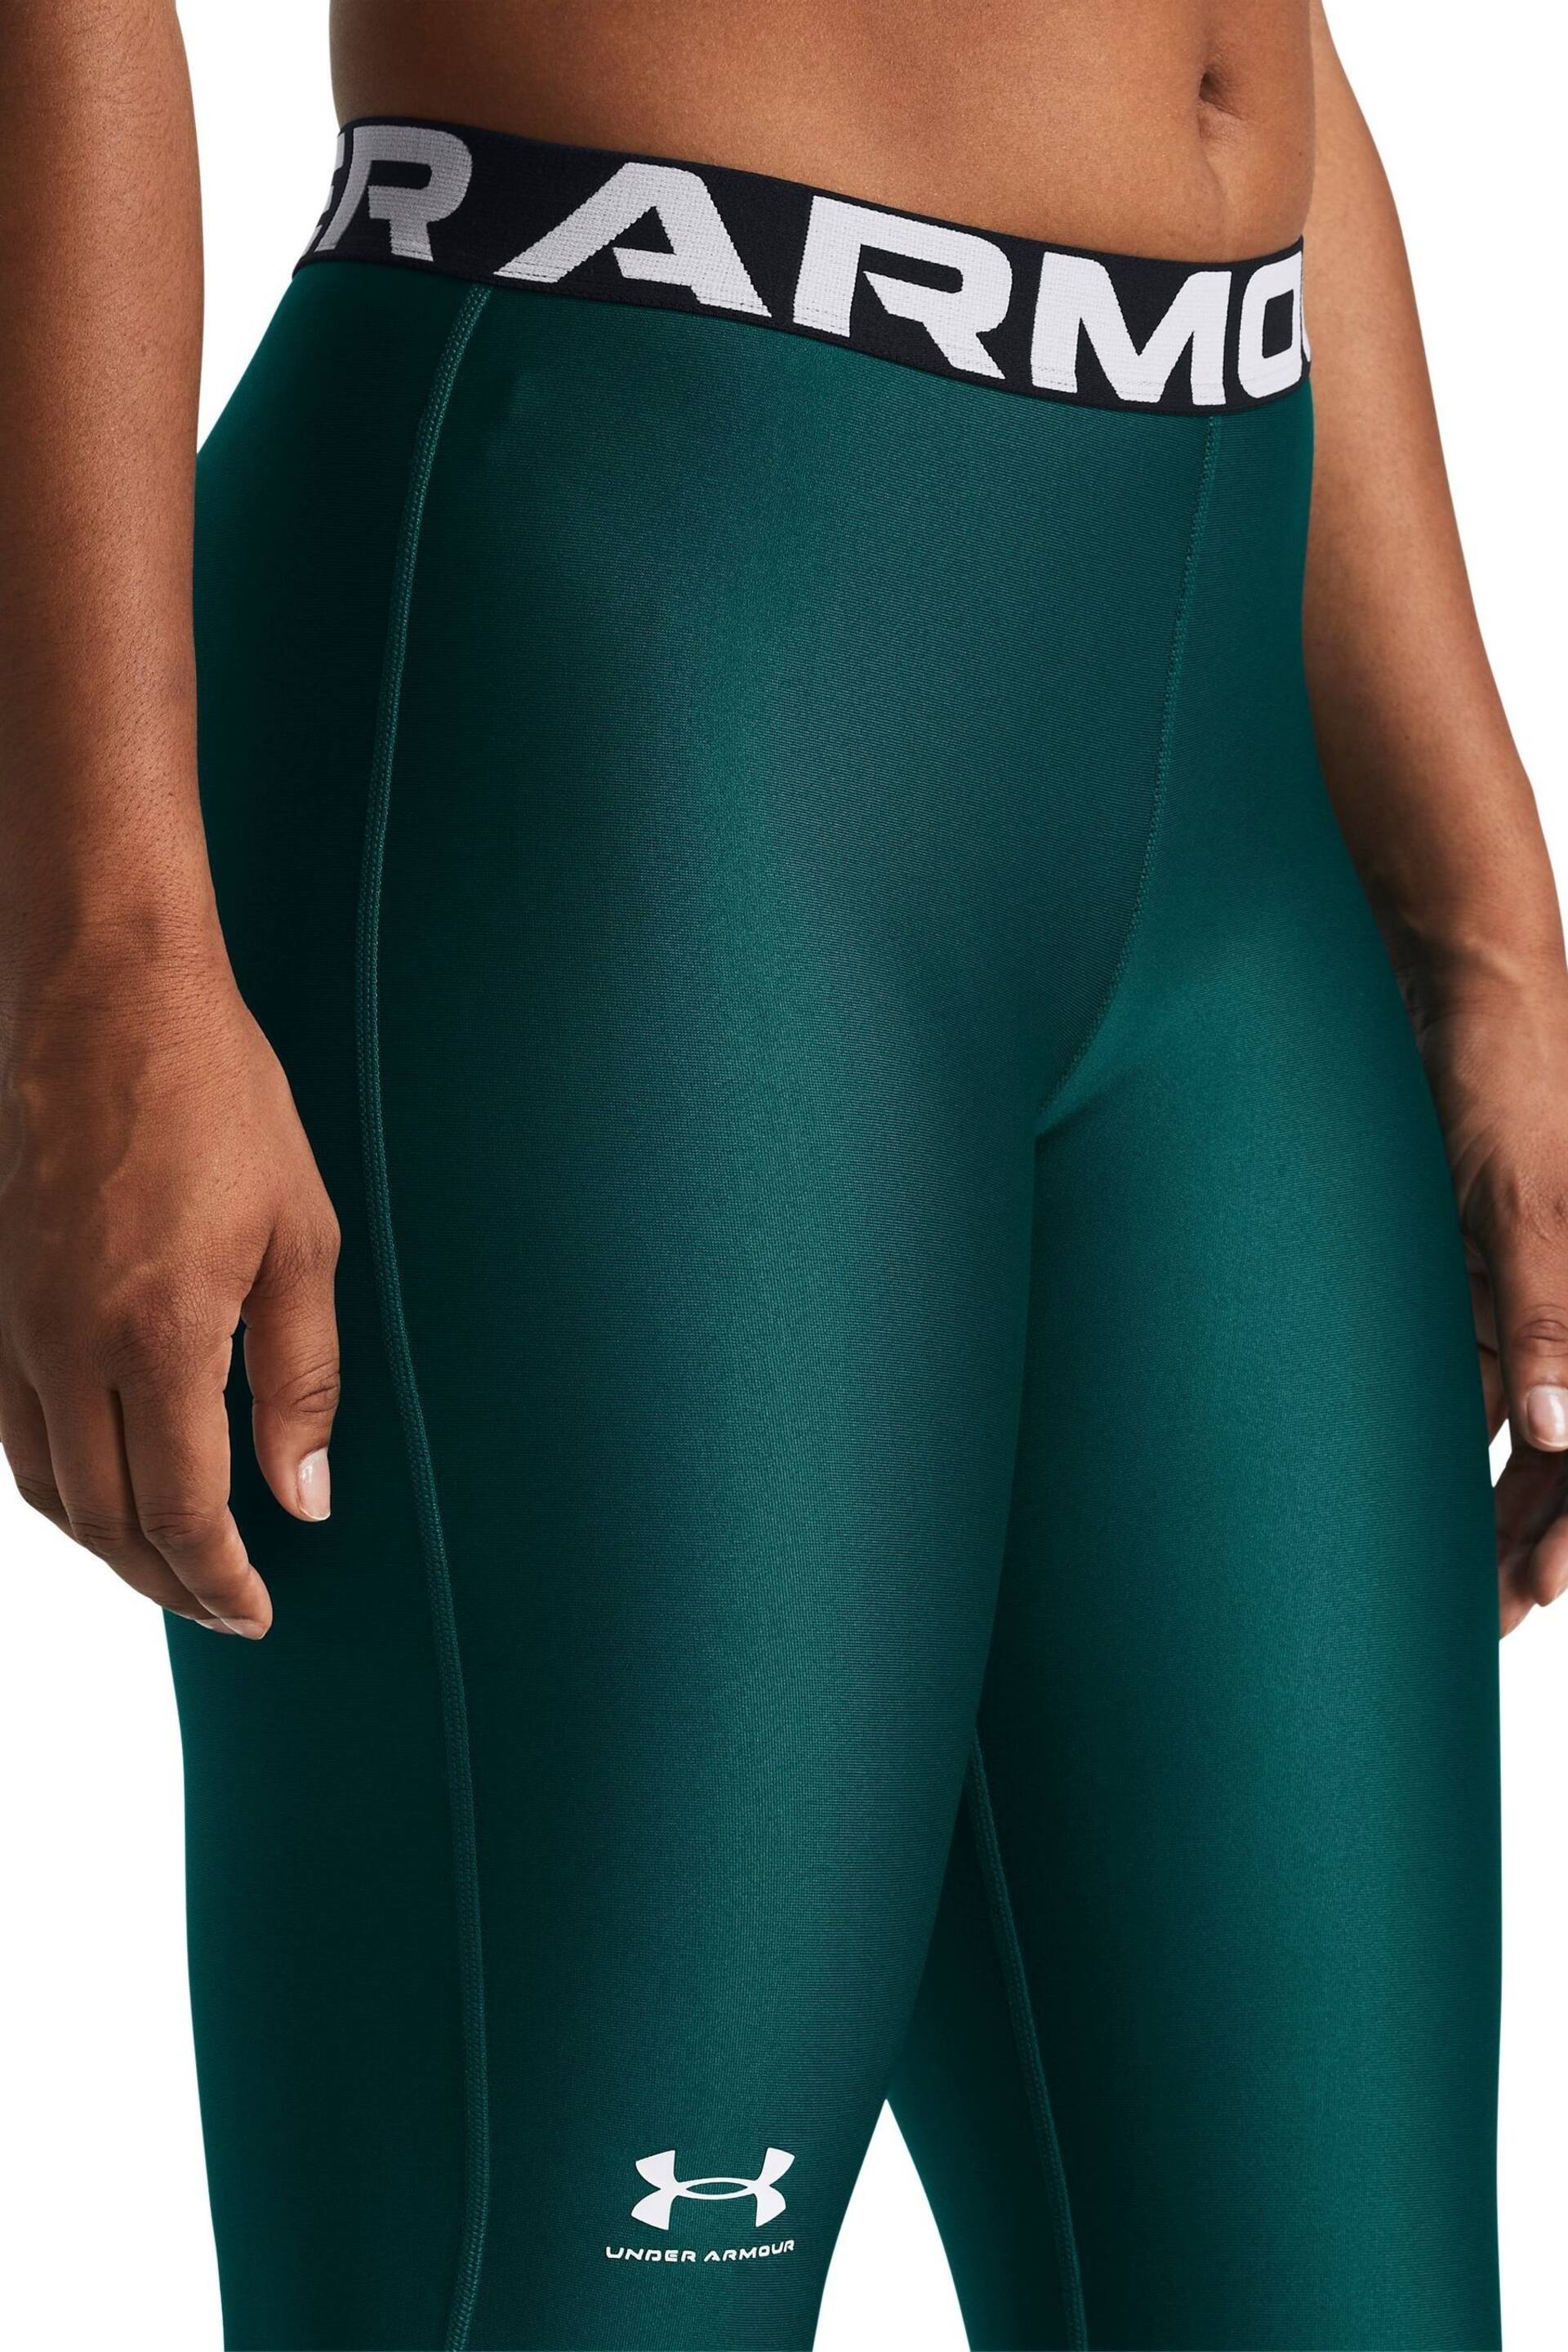 Under Armour Green Womens Heat Gear Authentics Leggings - Image 6 of 8